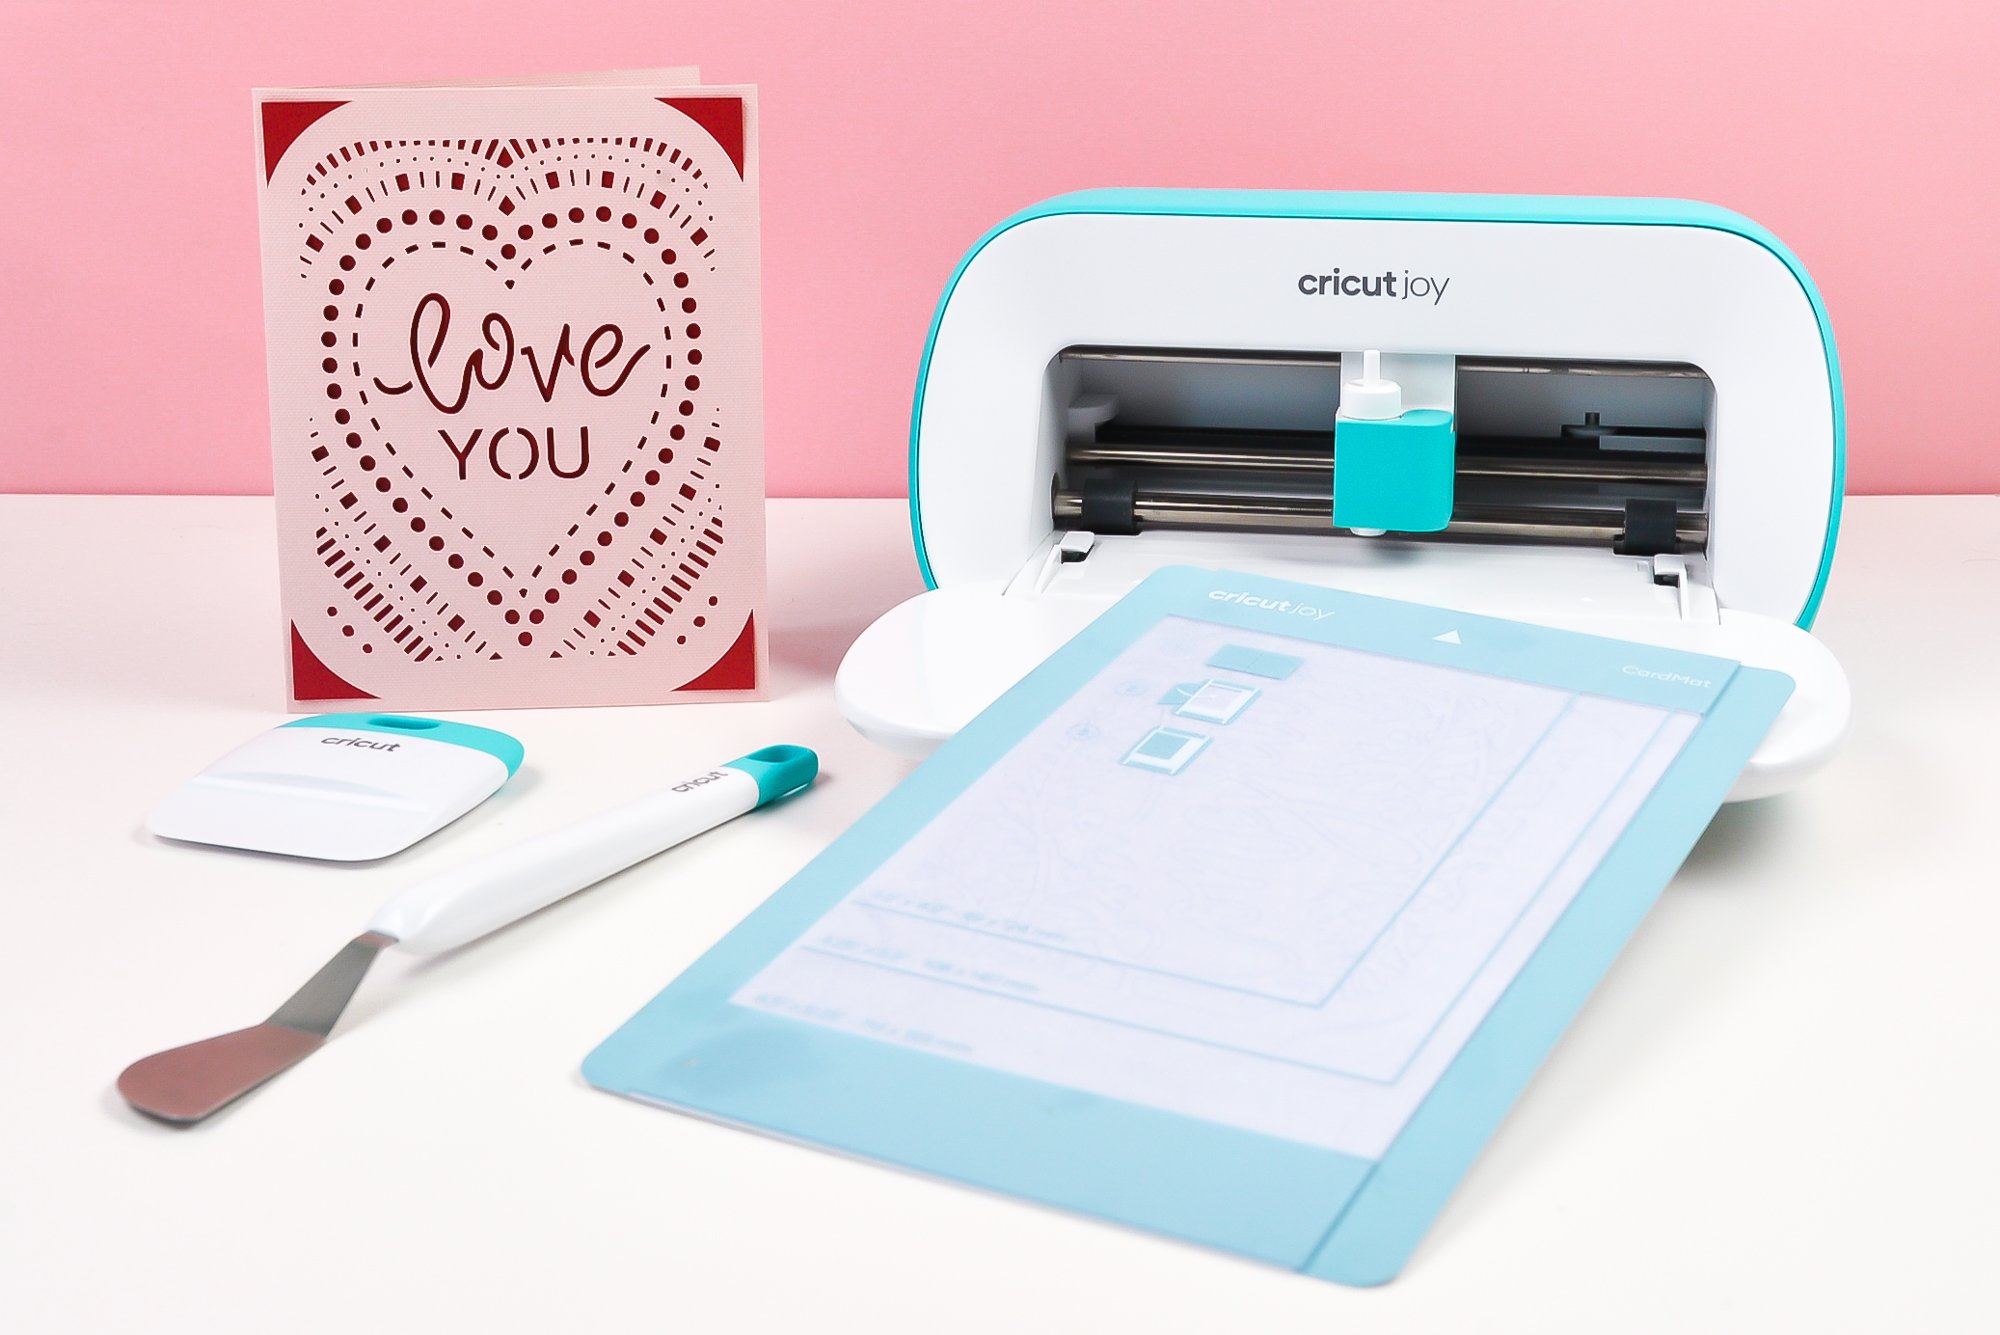 How to use the Cricut Joy Card Mat - Step By Step Tutorial for Beginners 